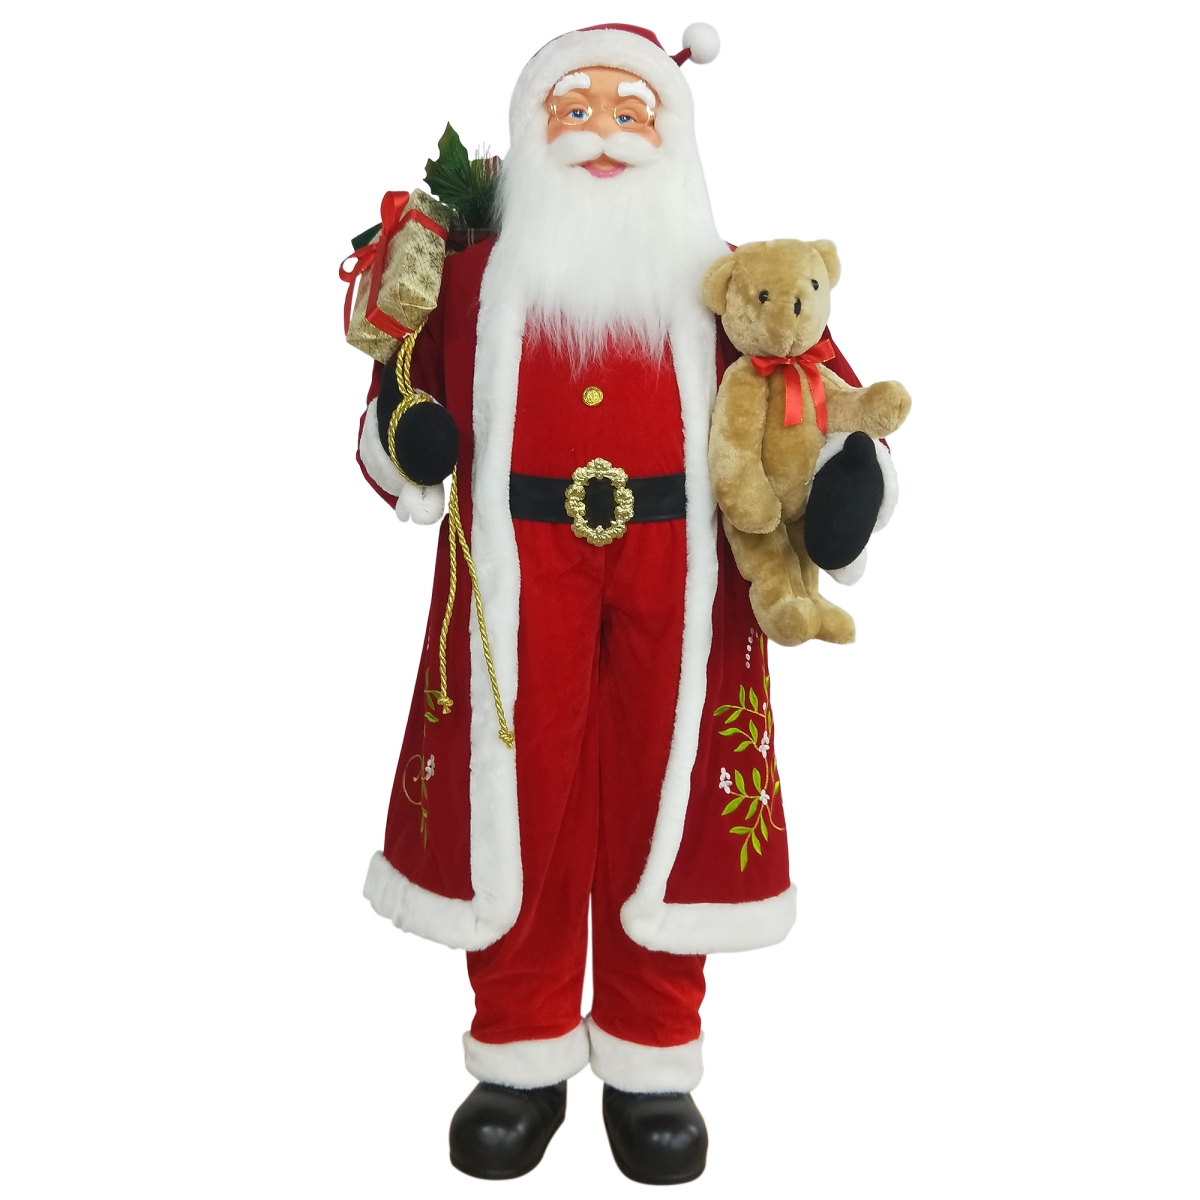 32915433 5 ft. Life-Size Standing Santa Claus Christmas Figure with Teddy Bear & Gift Bag -  NorthLight